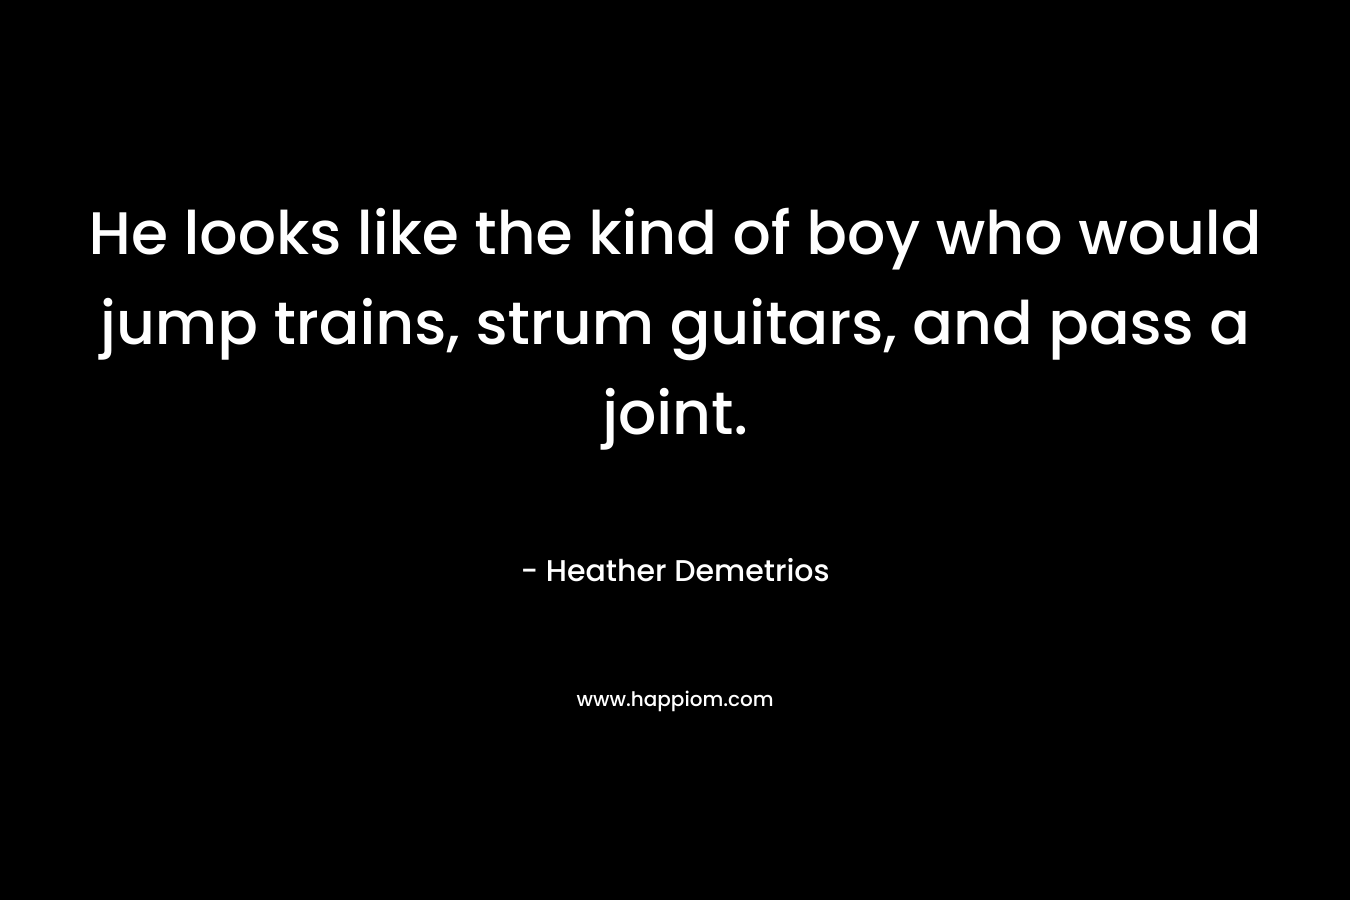 He looks like the kind of boy who would jump trains, strum guitars, and pass a joint. – Heather Demetrios